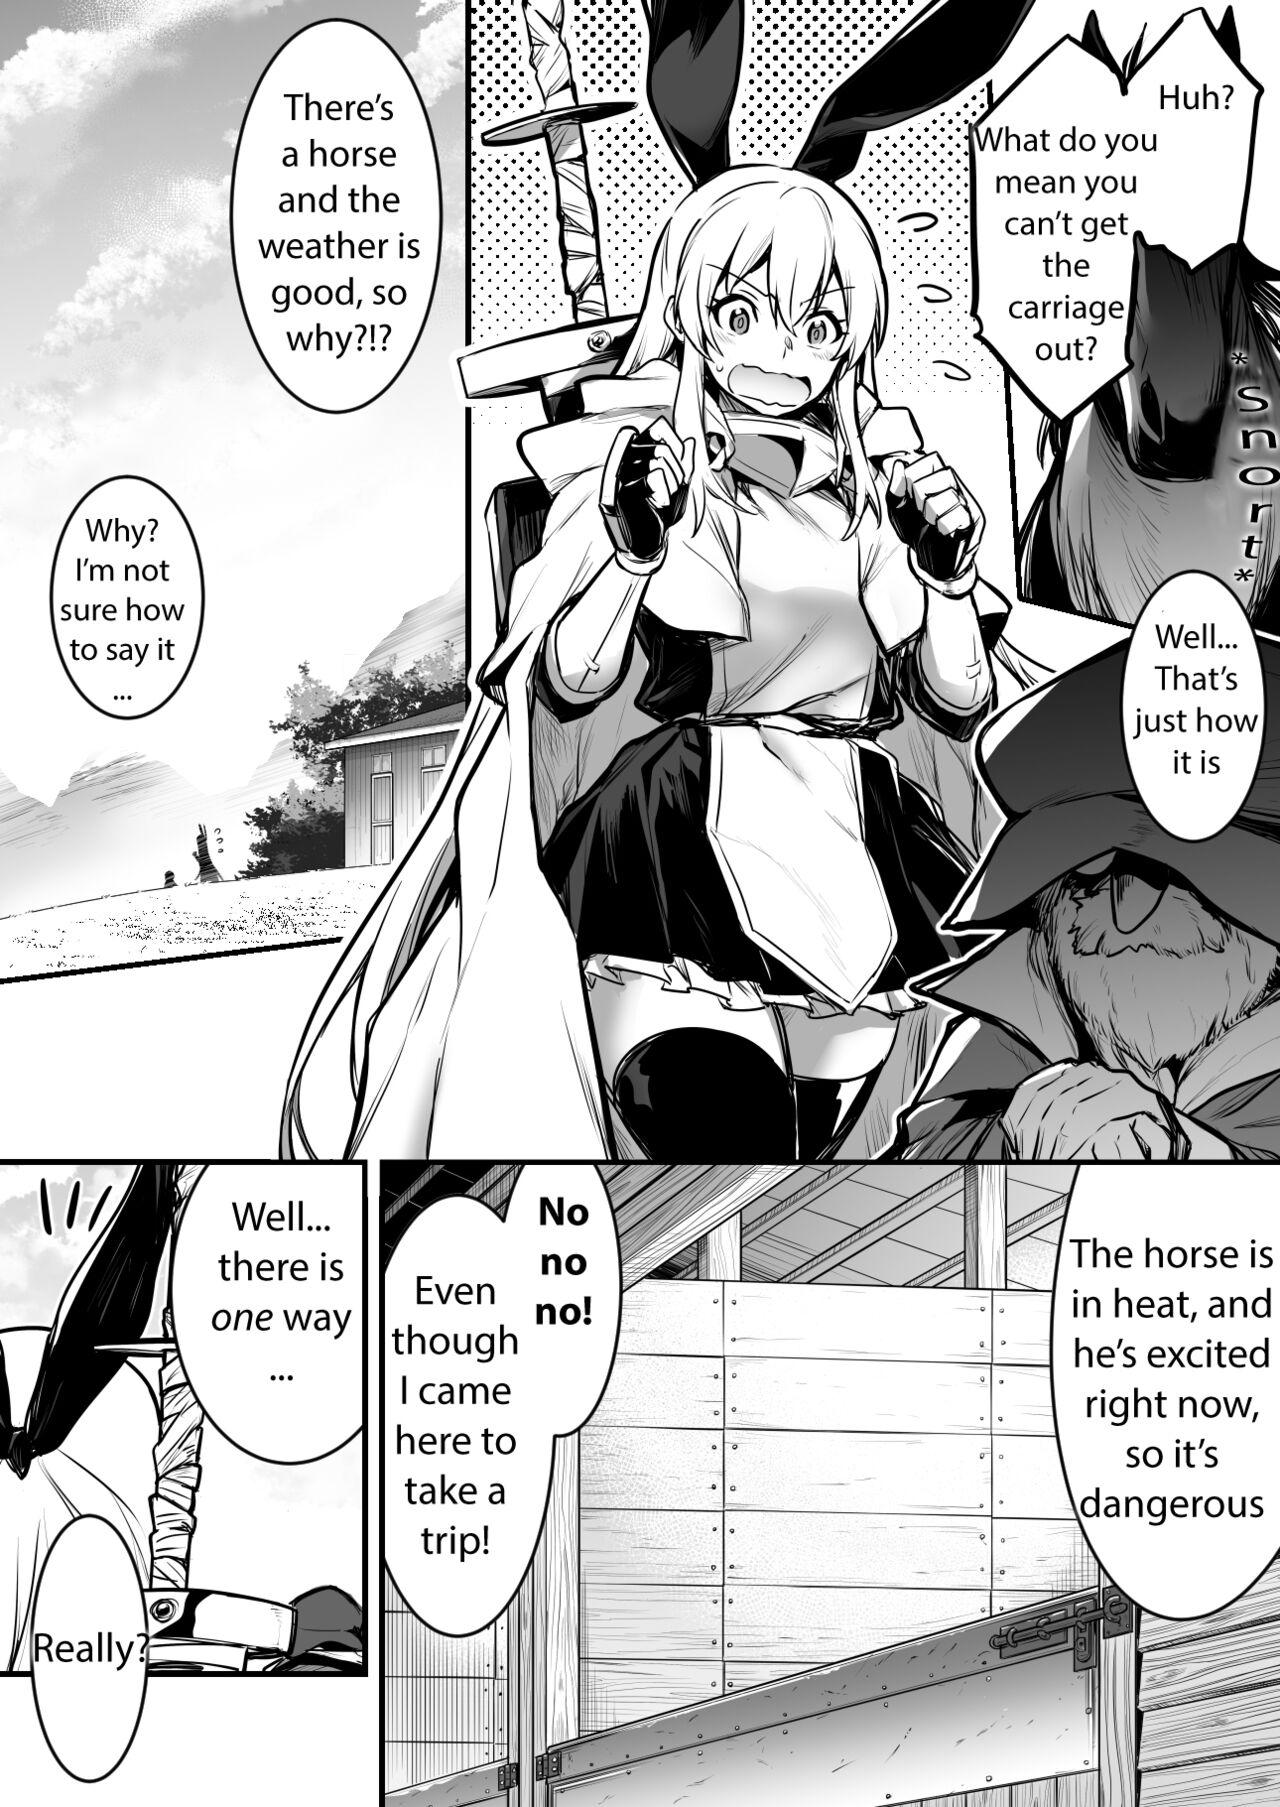 Adventure-chan helps the lustful horse cum so he'll carry her away 0